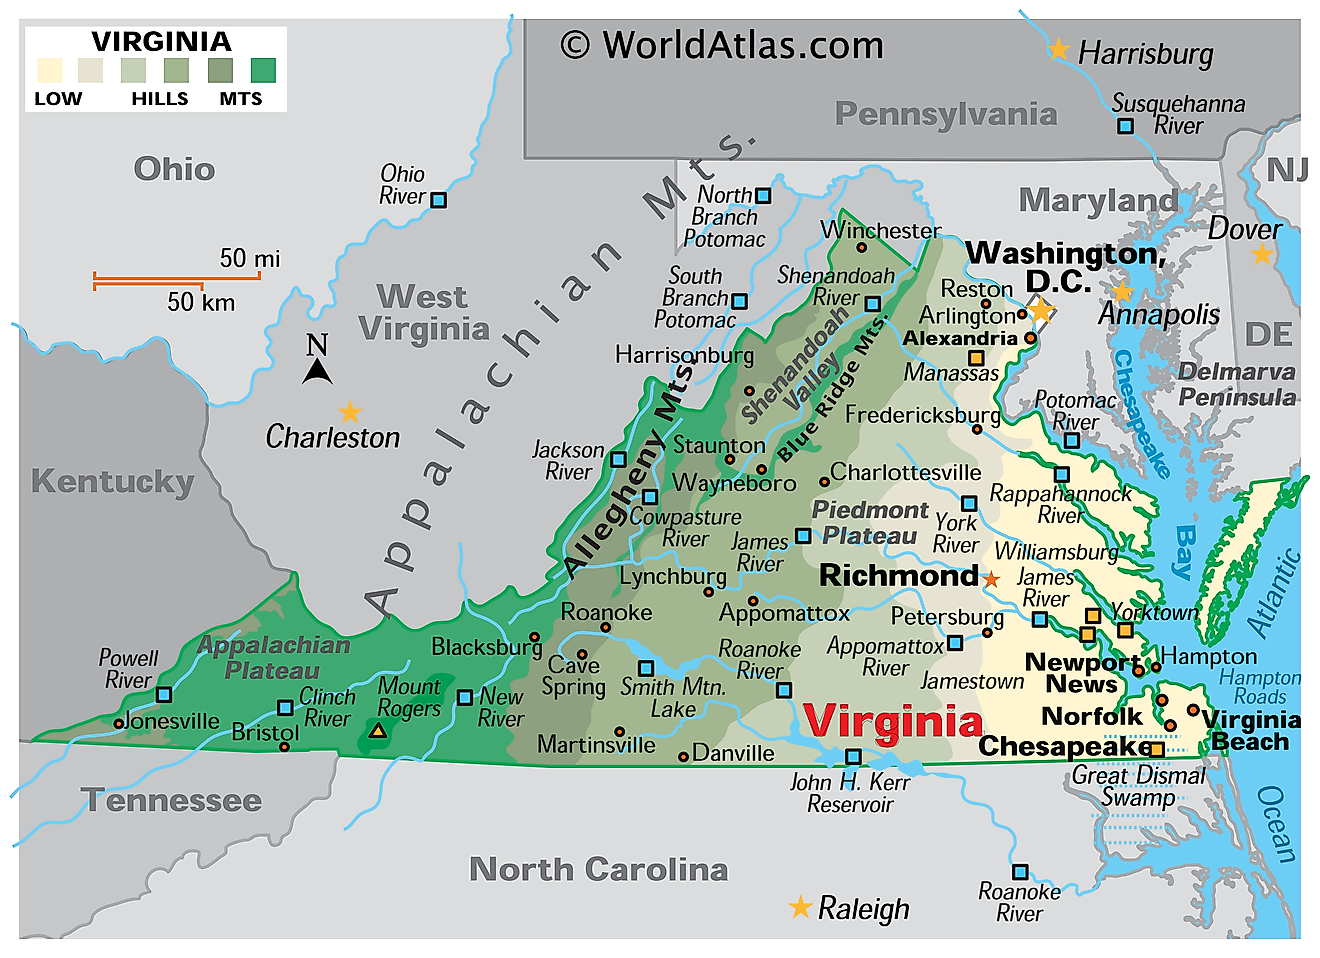 Virginia Maps And Facts World Atlas 8629